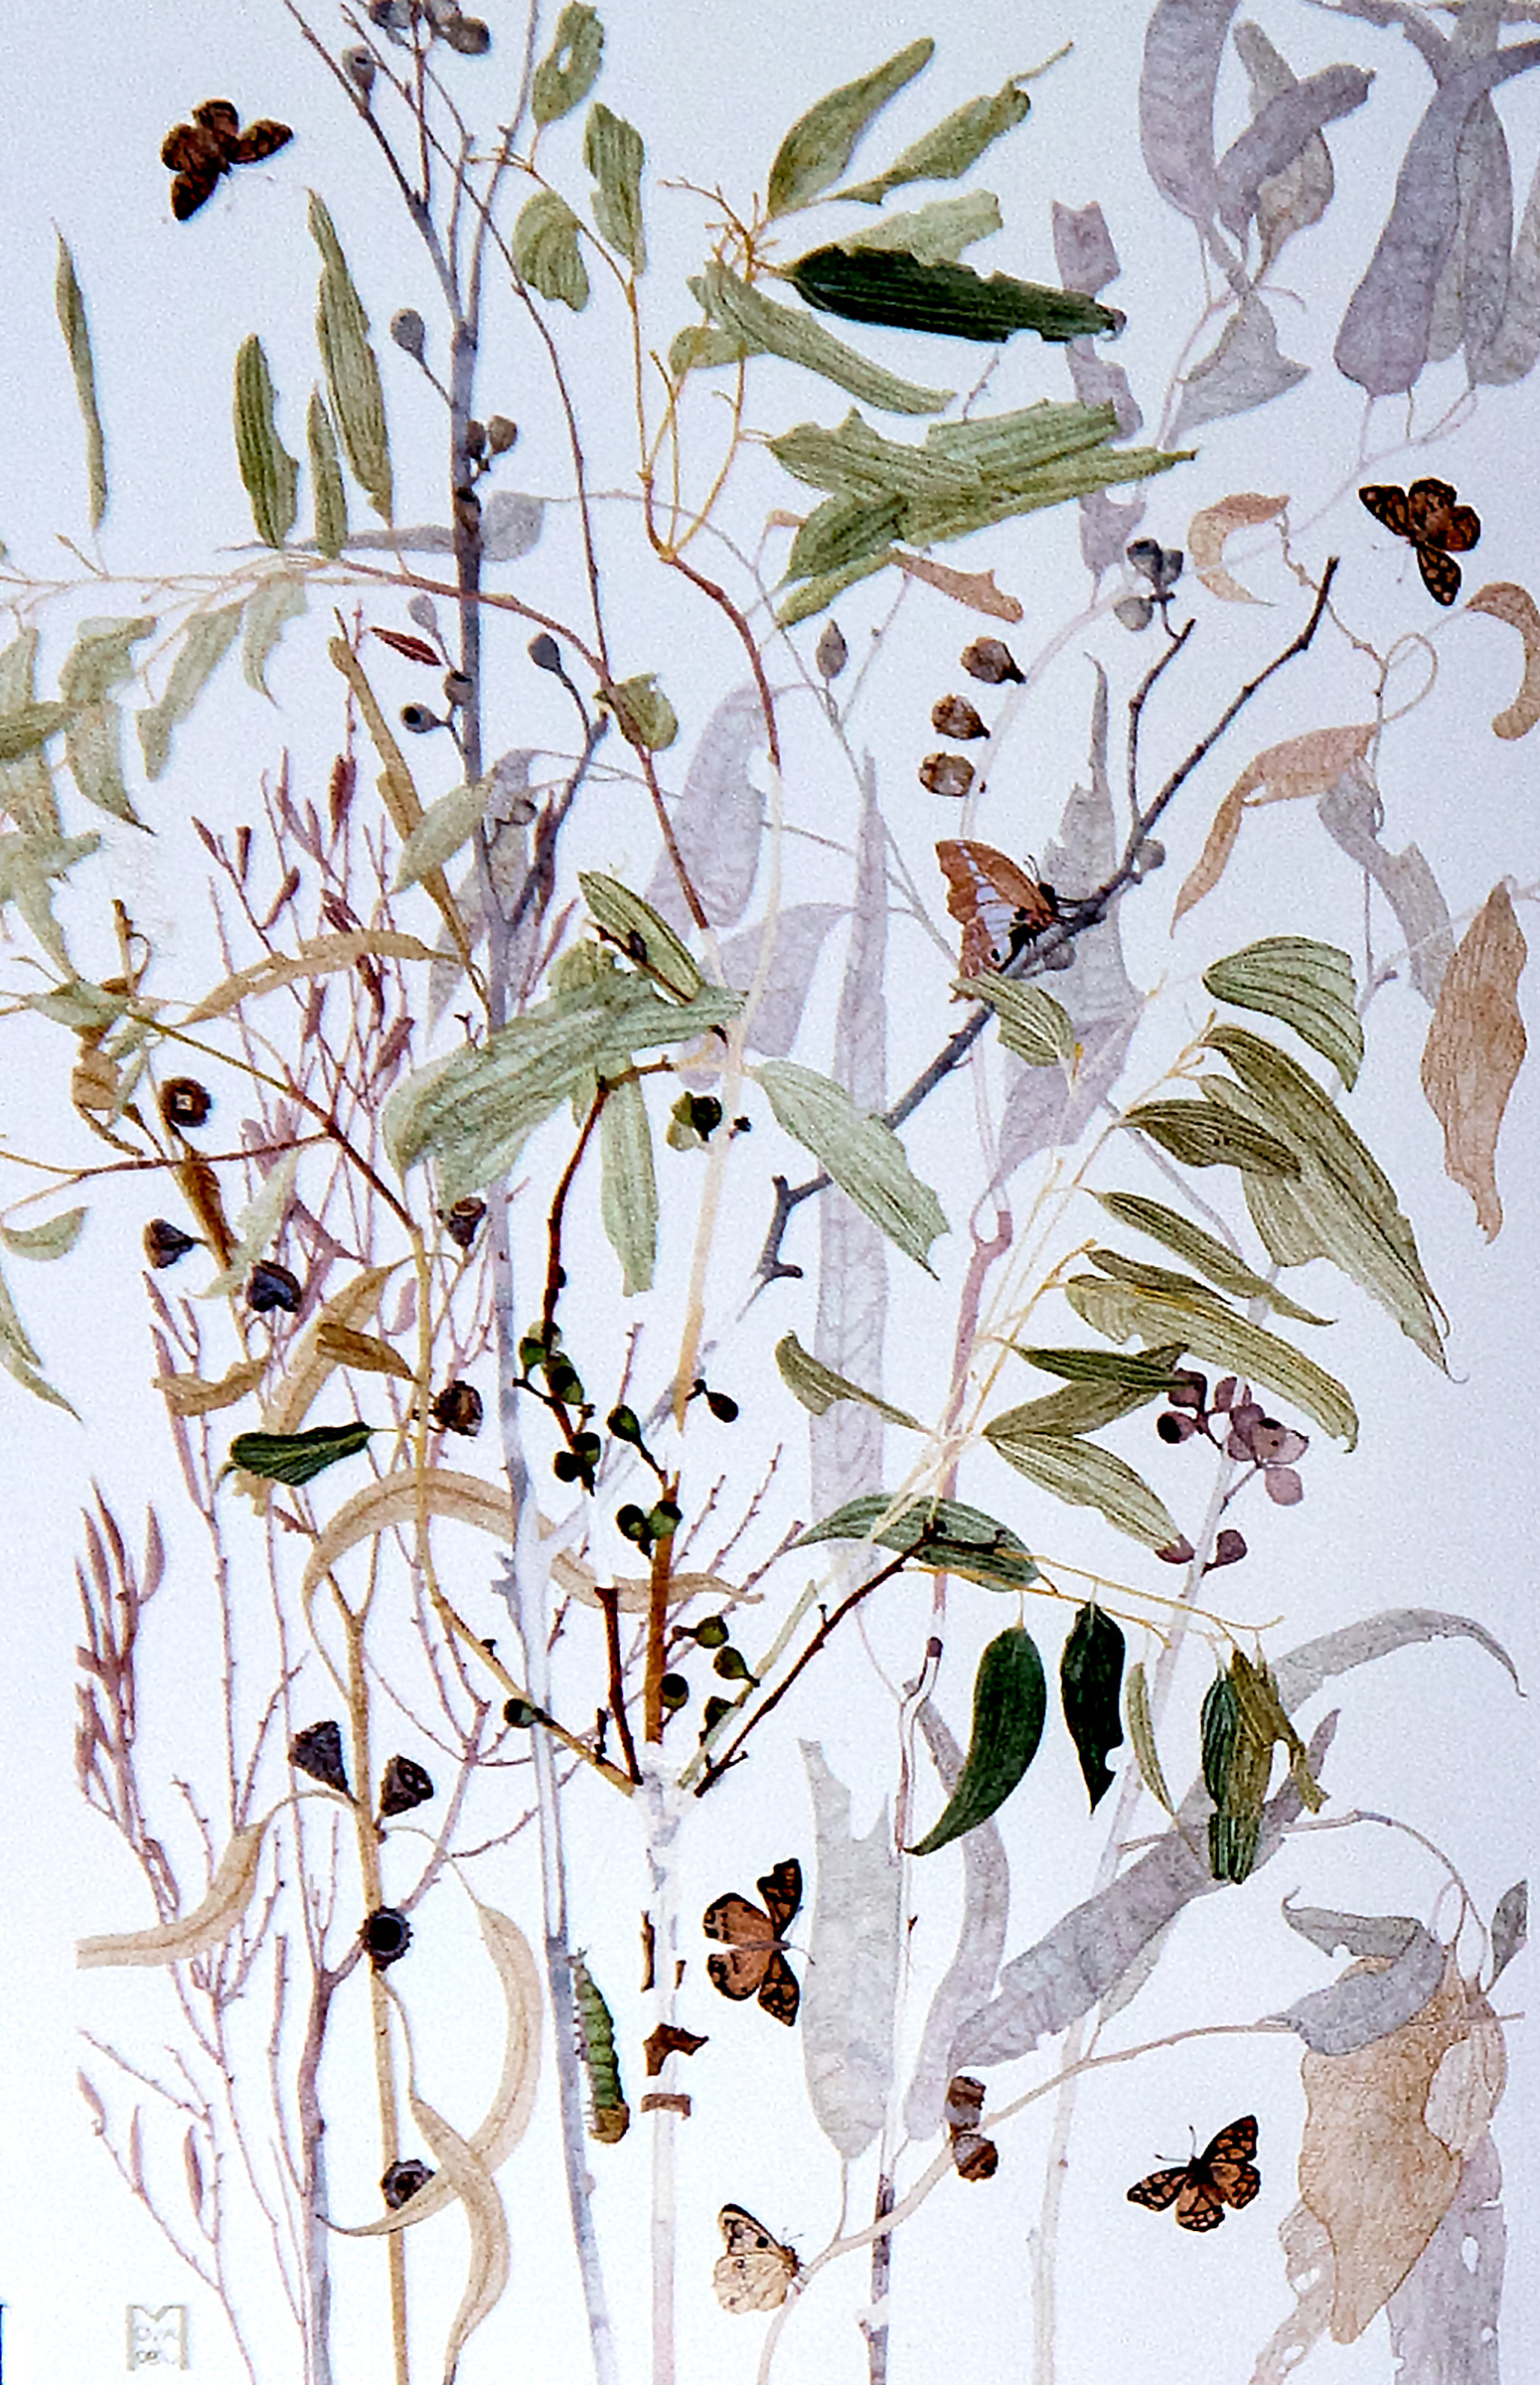 Eucalypt with butterflies, from Artistic Reflections on the Tree_watercolour_102 x 75mm 